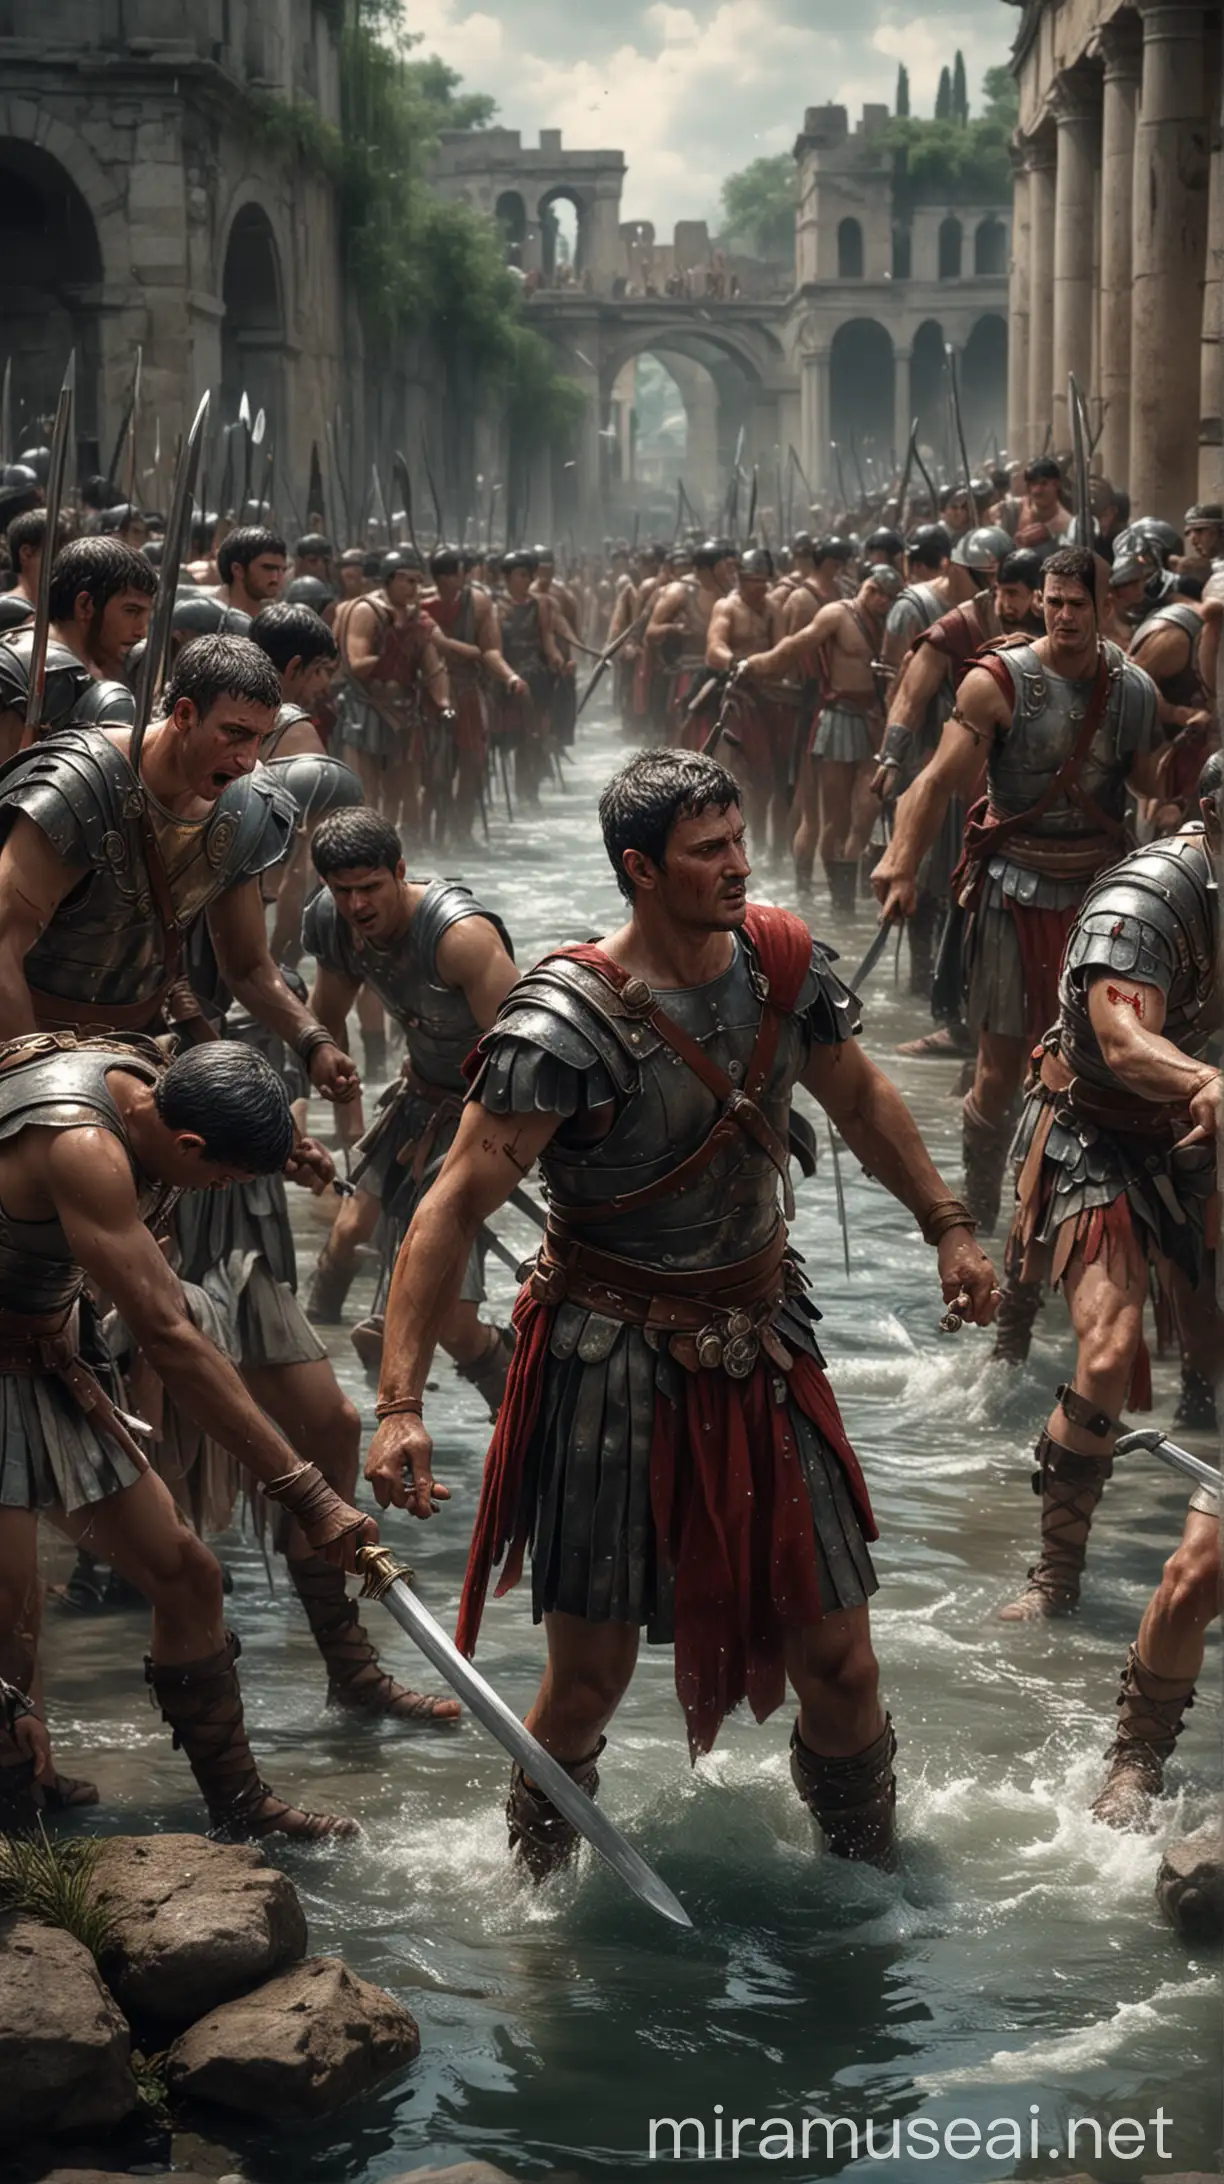 Roman soldiers stabbing the water with their swords while Caligula watches. hyper realistic